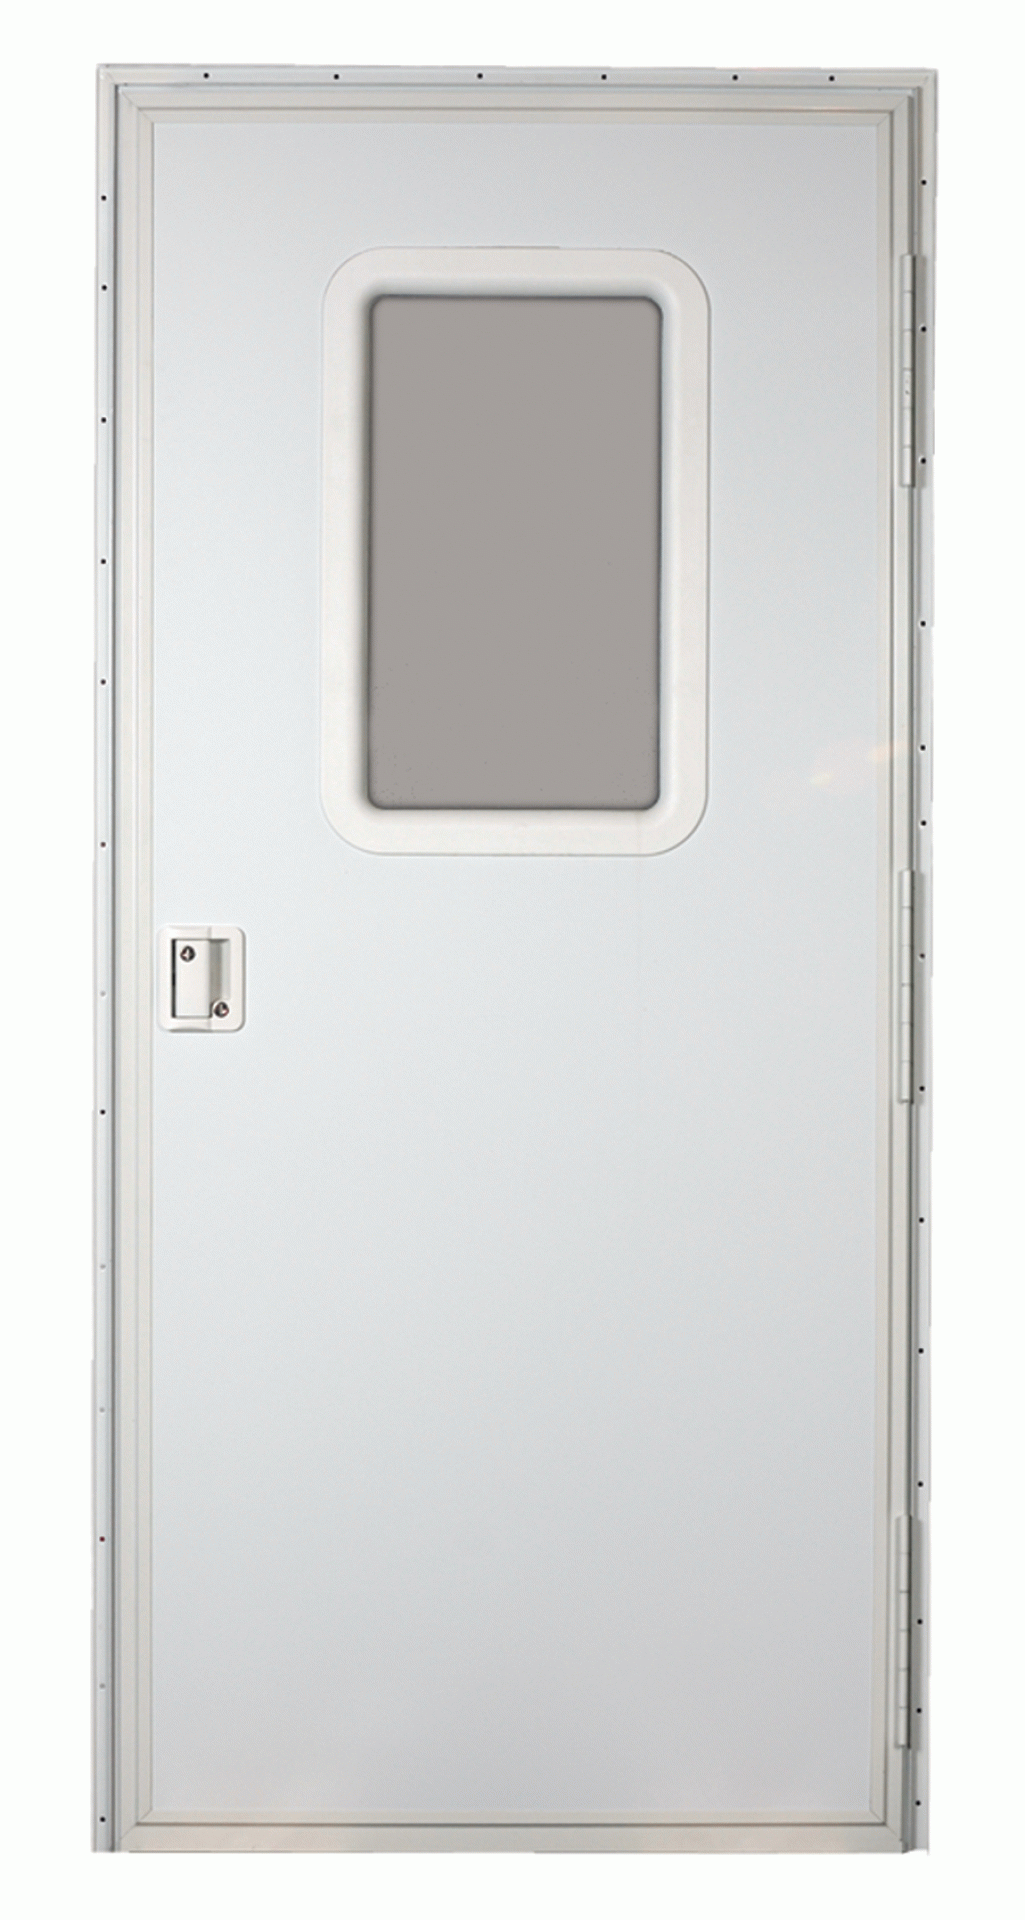 AP PRODUCTS | 015-267211 | TOWABLE ENTRY DOOR RH SQUARE -26" X 72" - COLONIAL WHITE